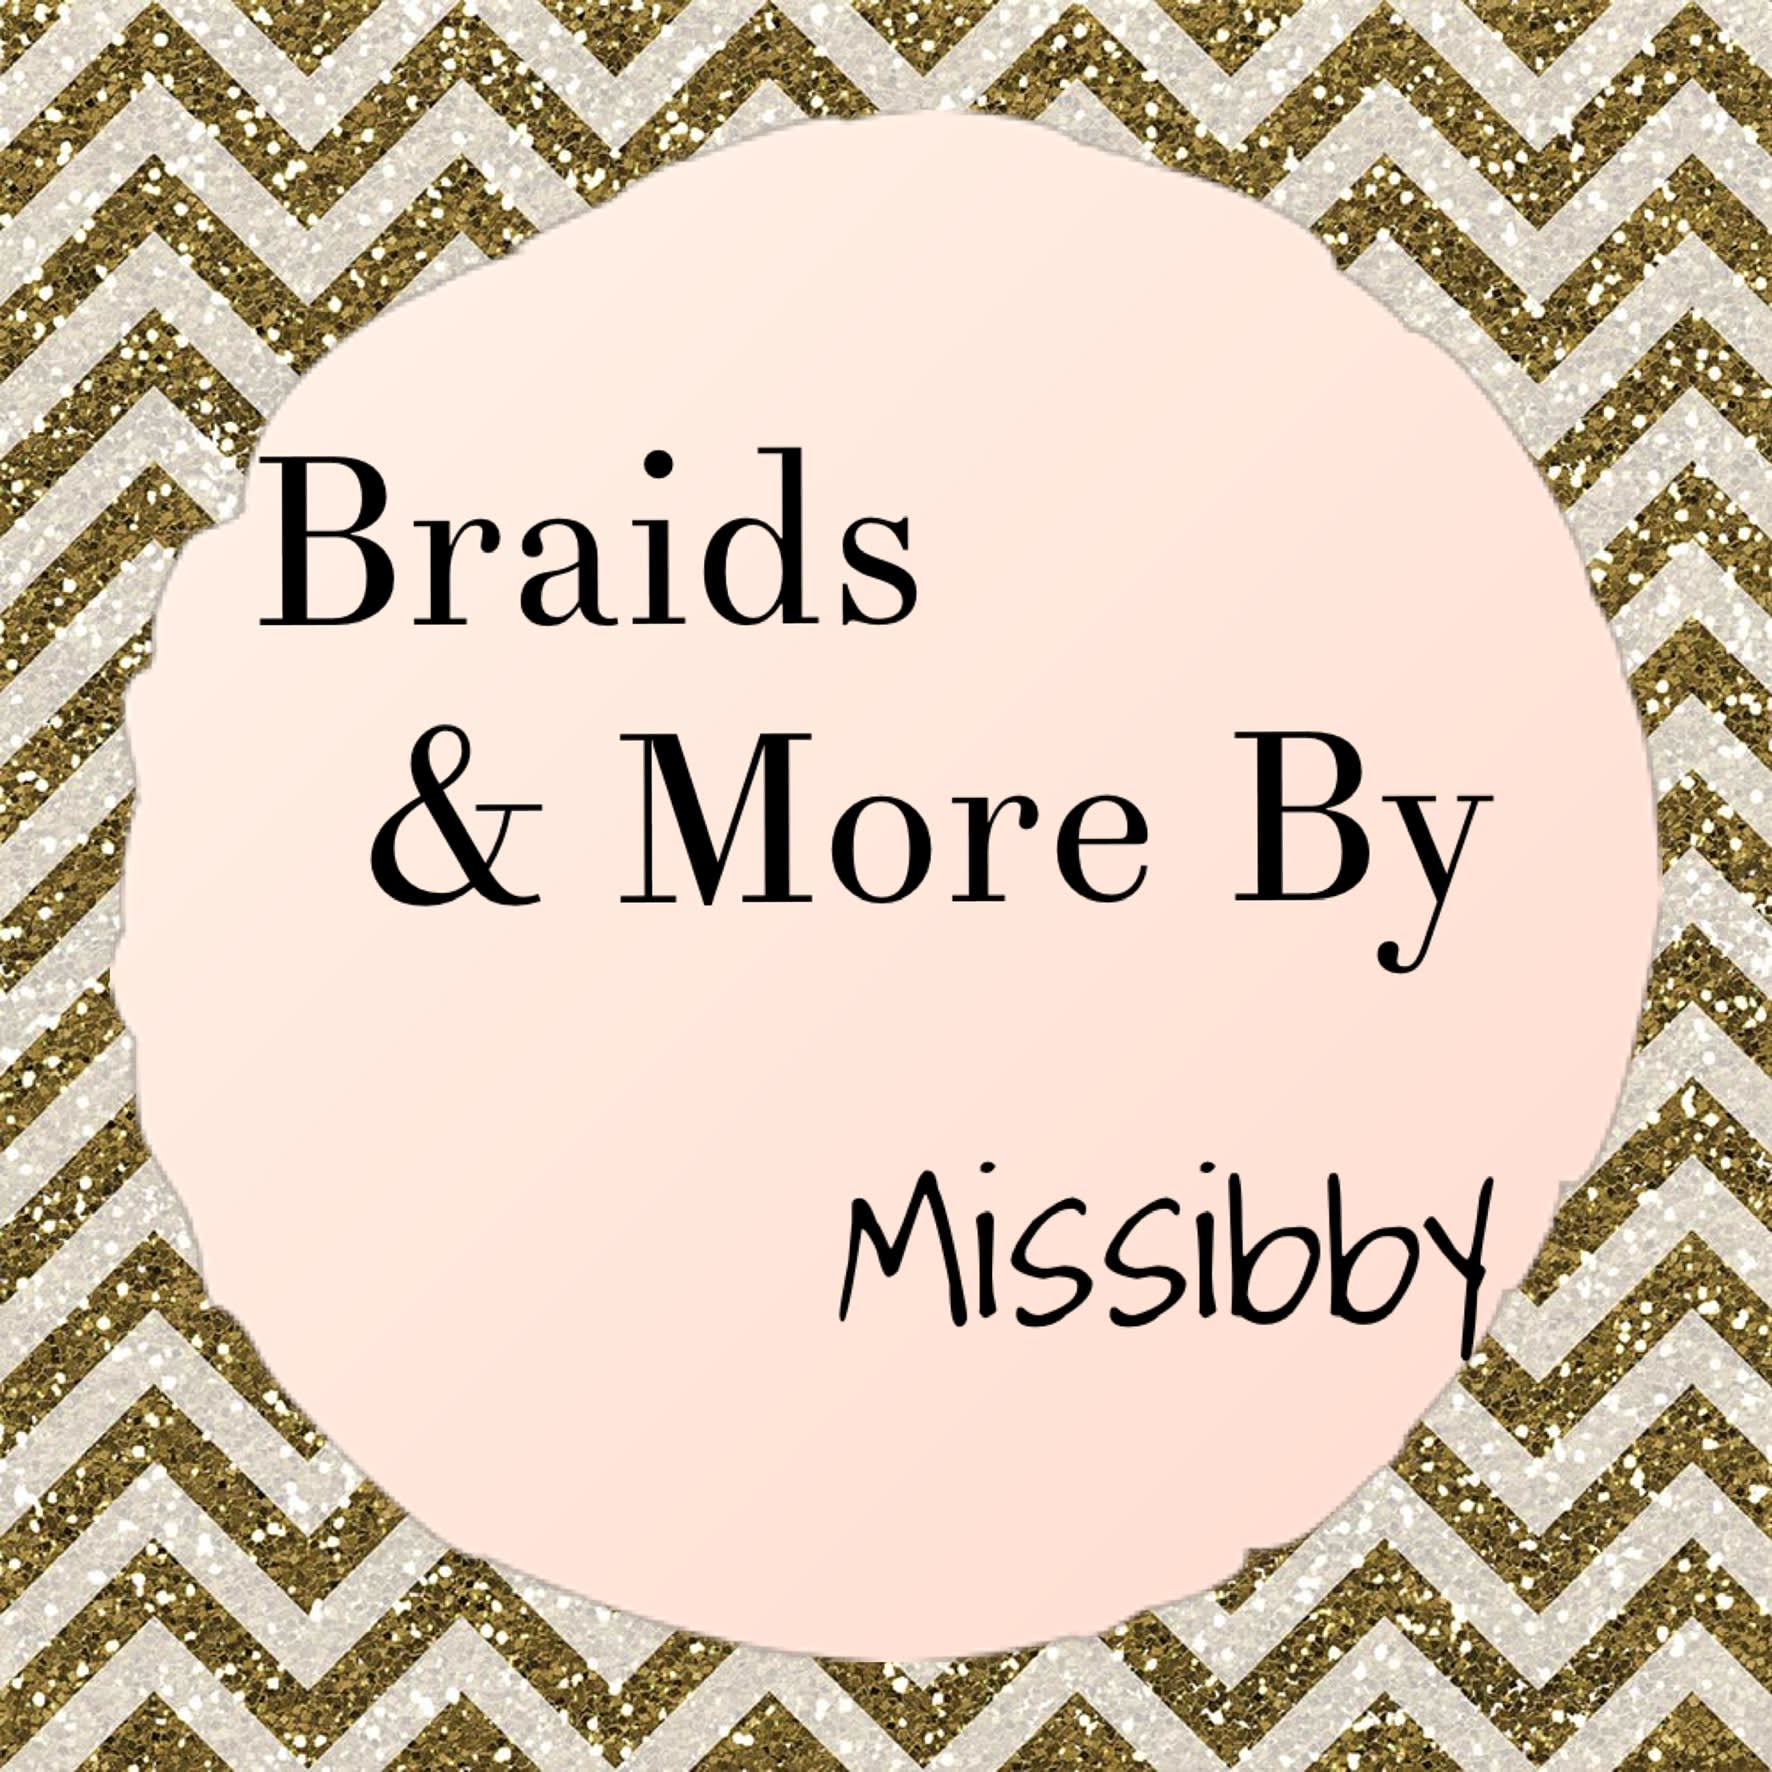 Braids & More By Missibby